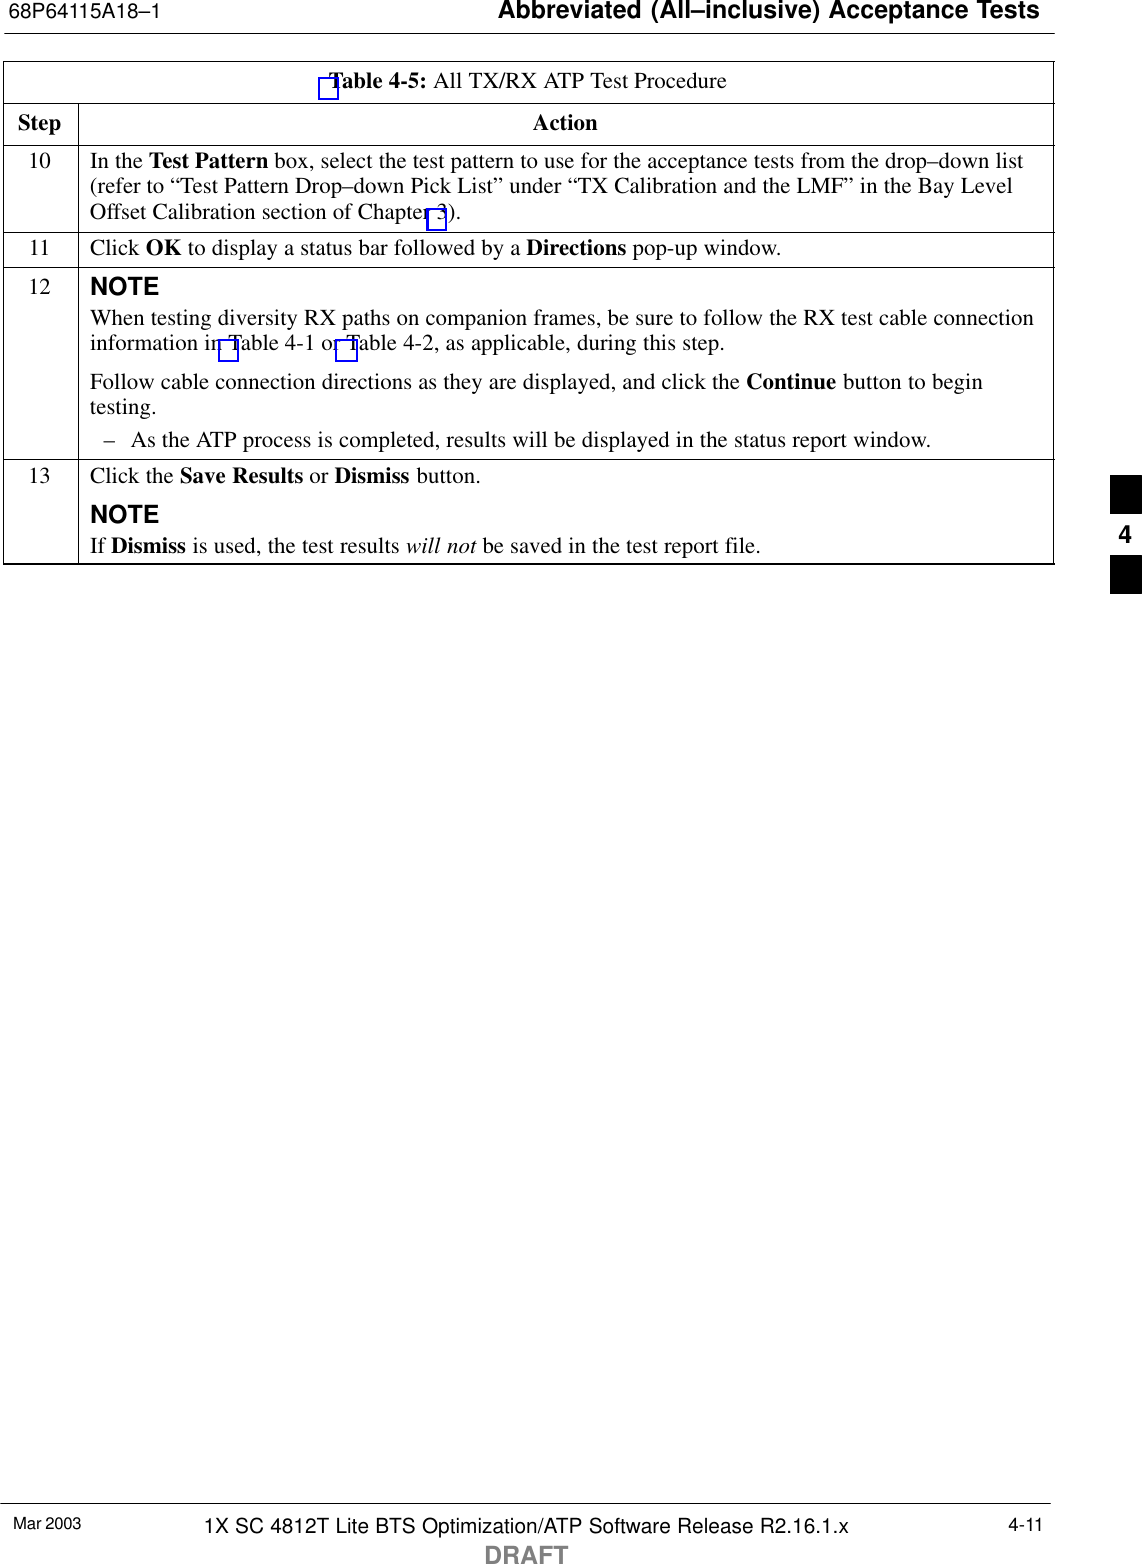 Abbreviated (All–inclusive) Acceptance Tests68P64115A18–1Mar 2003 1X SC 4812T Lite BTS Optimization/ATP Software Release R2.16.1.xDRAFT4-11Table 4-5: All TX/RX ATP Test ProcedureStep Action10 In the Test Pattern box, select the test pattern to use for the acceptance tests from the drop–down list(refer to “Test Pattern Drop–down Pick List” under “TX Calibration and the LMF” in the Bay LevelOffset Calibration section of Chapter 3).11 Click OK to display a status bar followed by a Directions pop-up window.12 NOTEWhen testing diversity RX paths on companion frames, be sure to follow the RX test cable connectioninformation in Table 4-1 or Table 4-2, as applicable, during this step.Follow cable connection directions as they are displayed, and click the Continue button to begintesting.– As the ATP process is completed, results will be displayed in the status report window.13 Click the Save Results or Dismiss button.NOTEIf Dismiss is used, the test results will not be saved in the test report file. 4